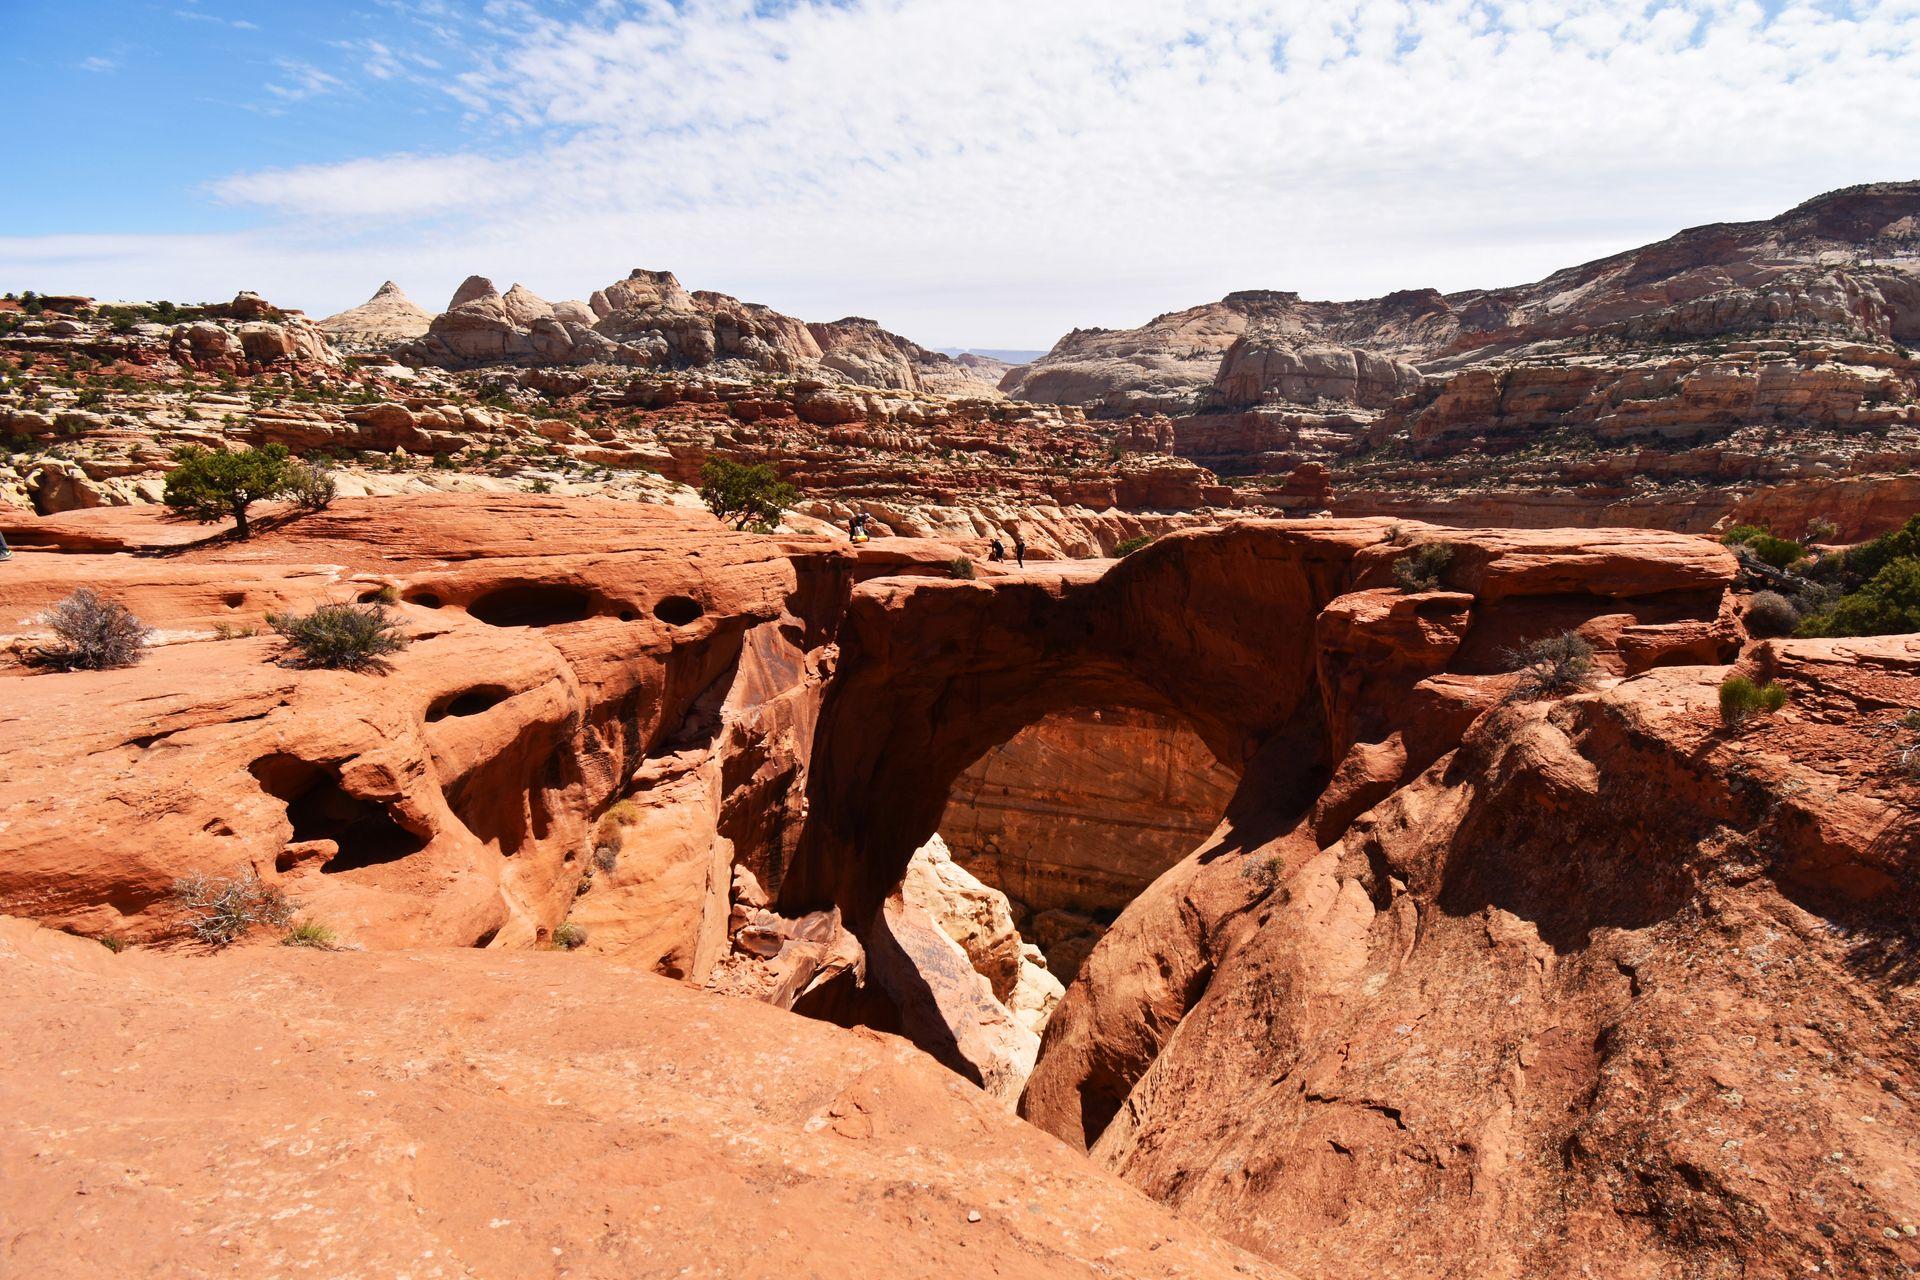 The Hickman Bridge in Capitol Reef National Park. A large orange rock arch is surrounded by orange rock formations.